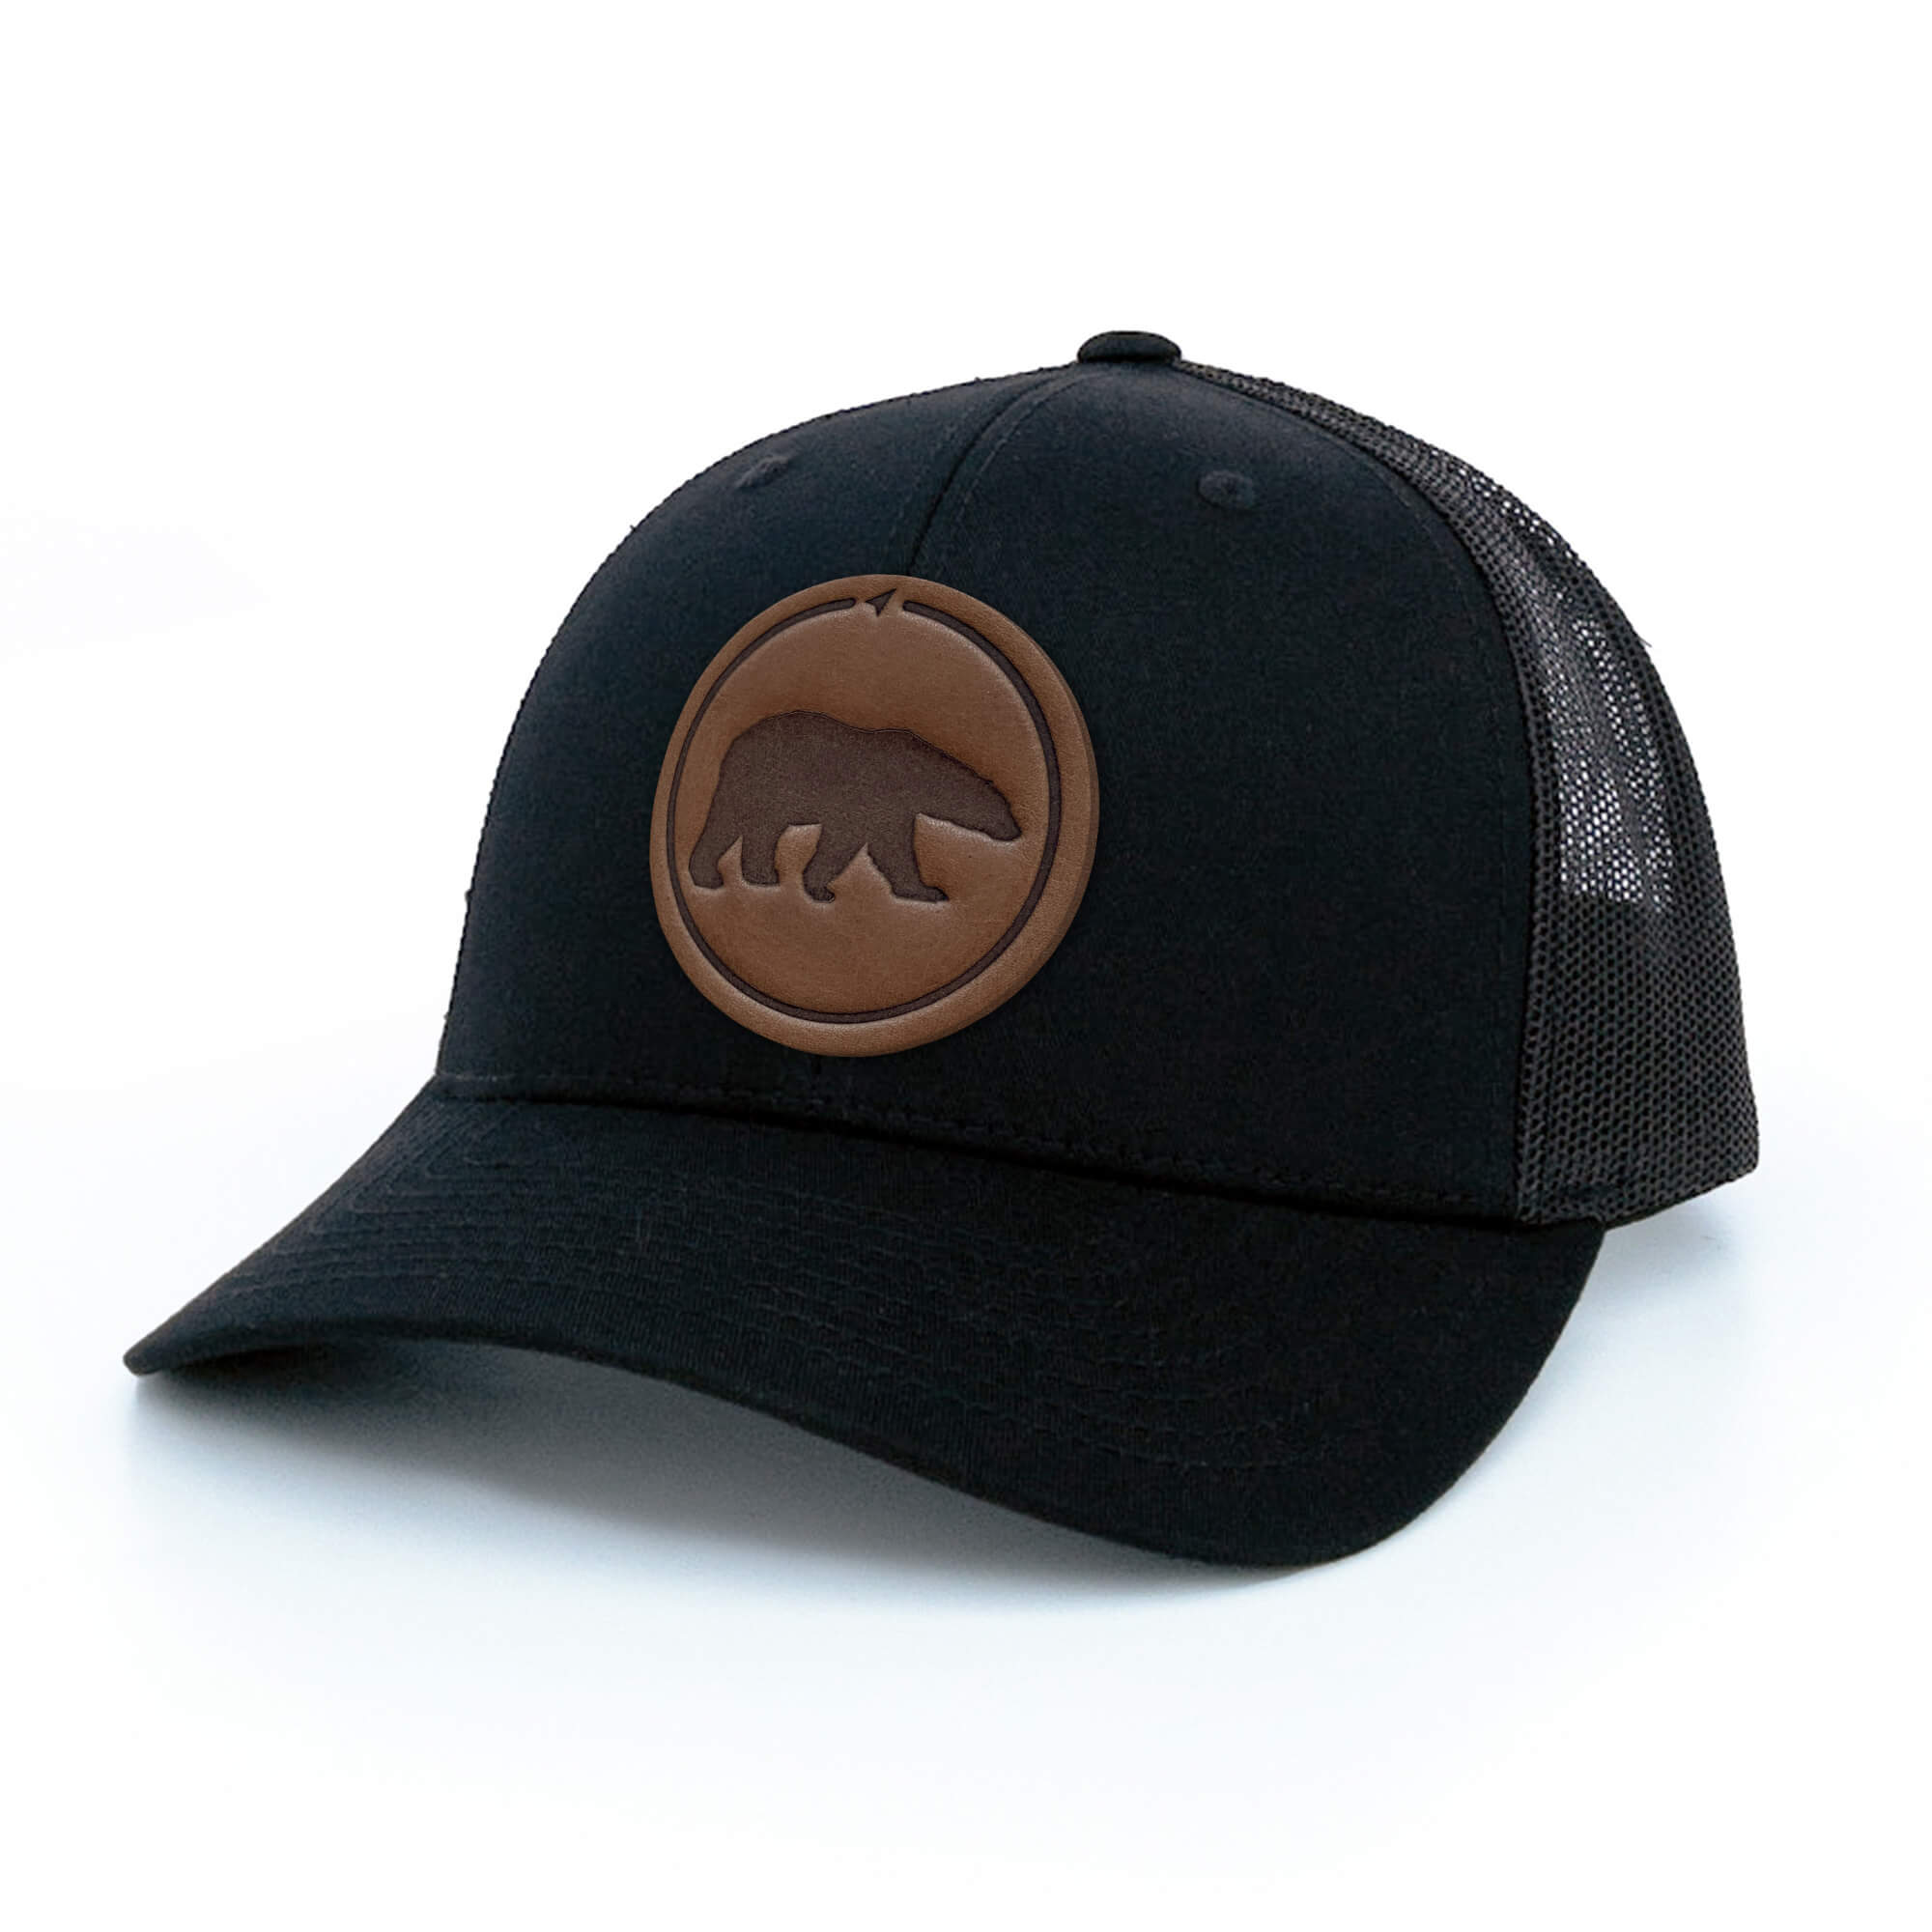 Black trucker hat with full-grain leather patch of a Polar Bear | BLACK-004-003, CHARC-004-003, NAVY-004-003, HGREY-004-003, MOSS-004-003, BROWN-004-003  Edit alt text